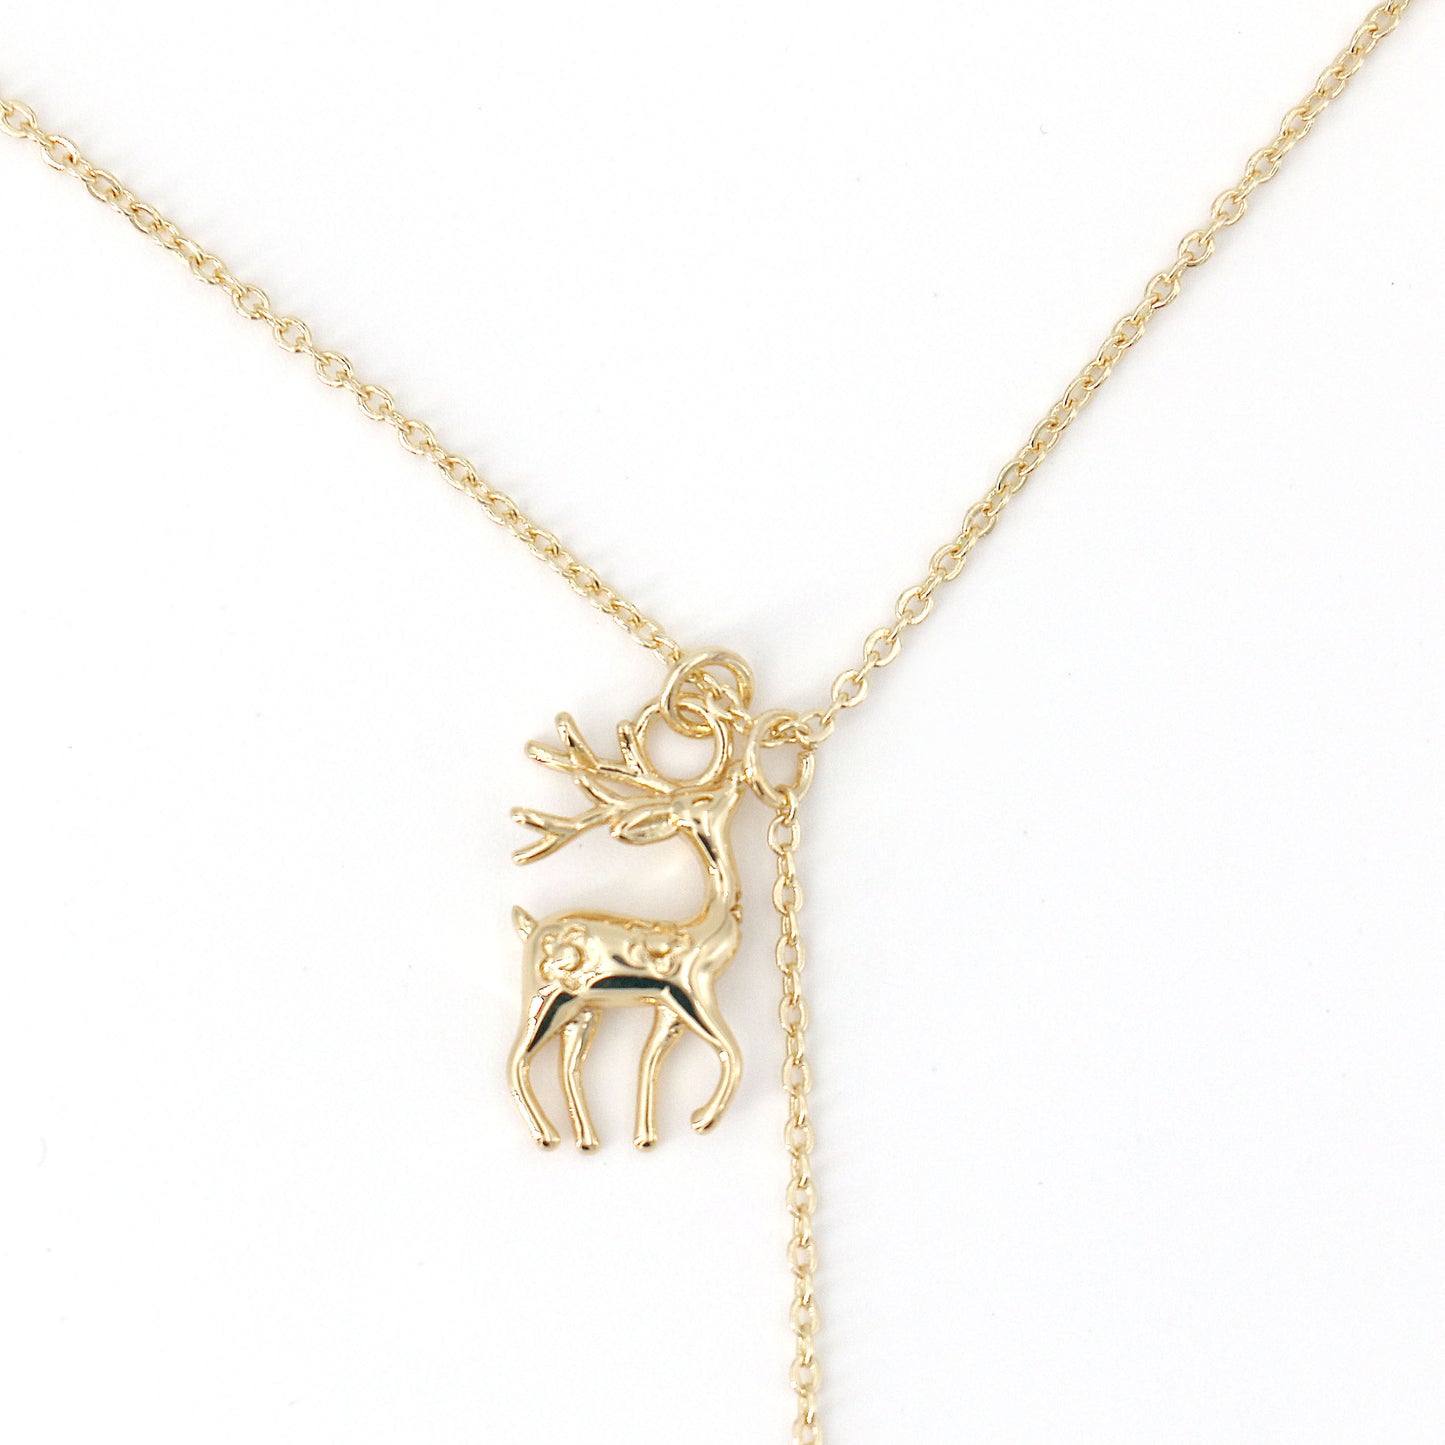 01 Fashion snowflake and deer necklace